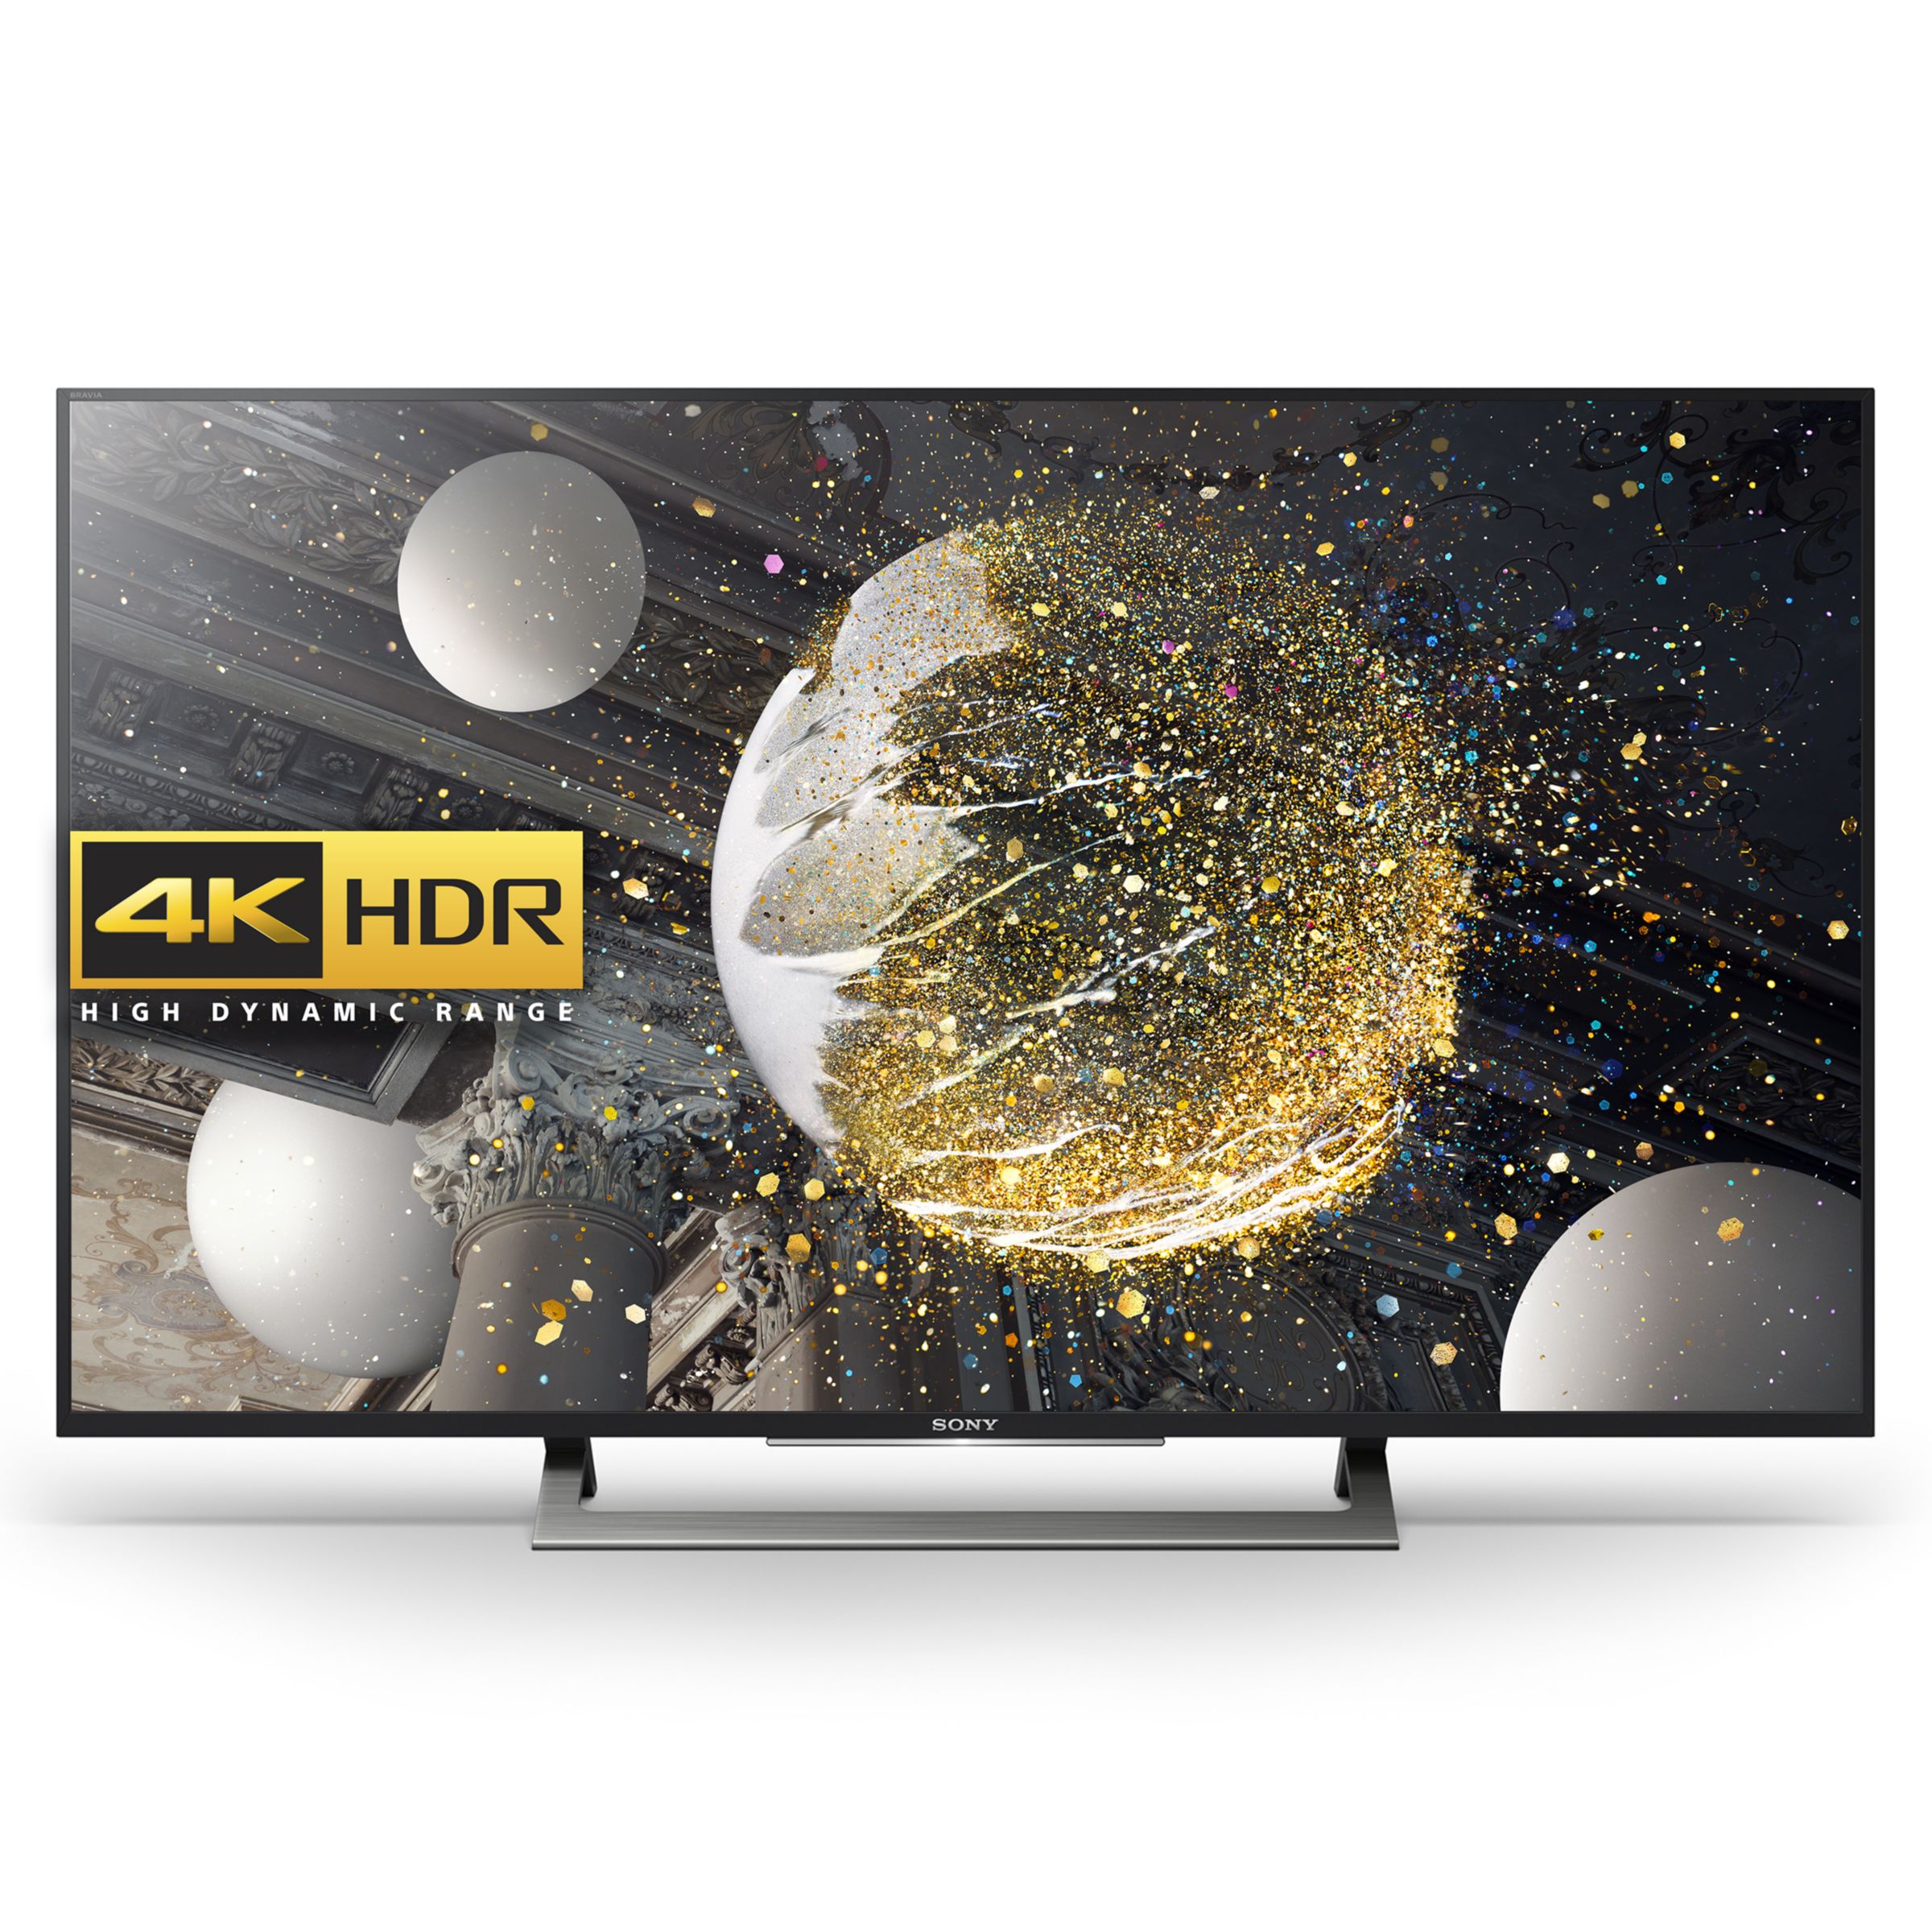 Sony Bravia 49XD8099 LED HDR 4K Ultra HD Android TV, 49